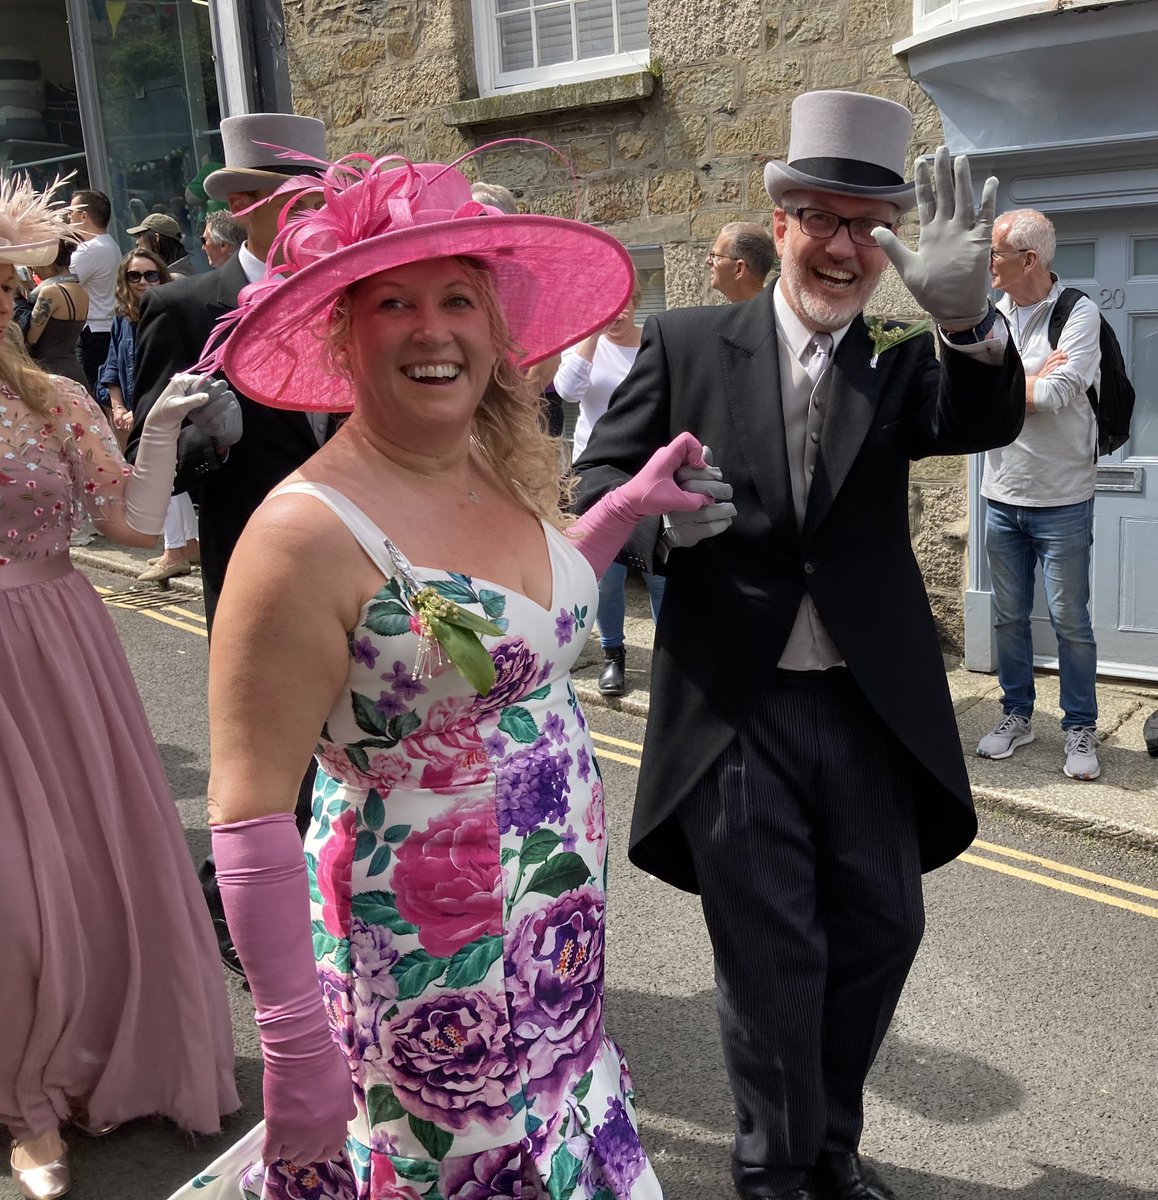 Helston does it again - another glorious #FloraDay. @RoyalNavy sailors from RNAS Culdrose were delighted to be invited to dance through the streets and join the good people of Helston on their special day #Cornwall